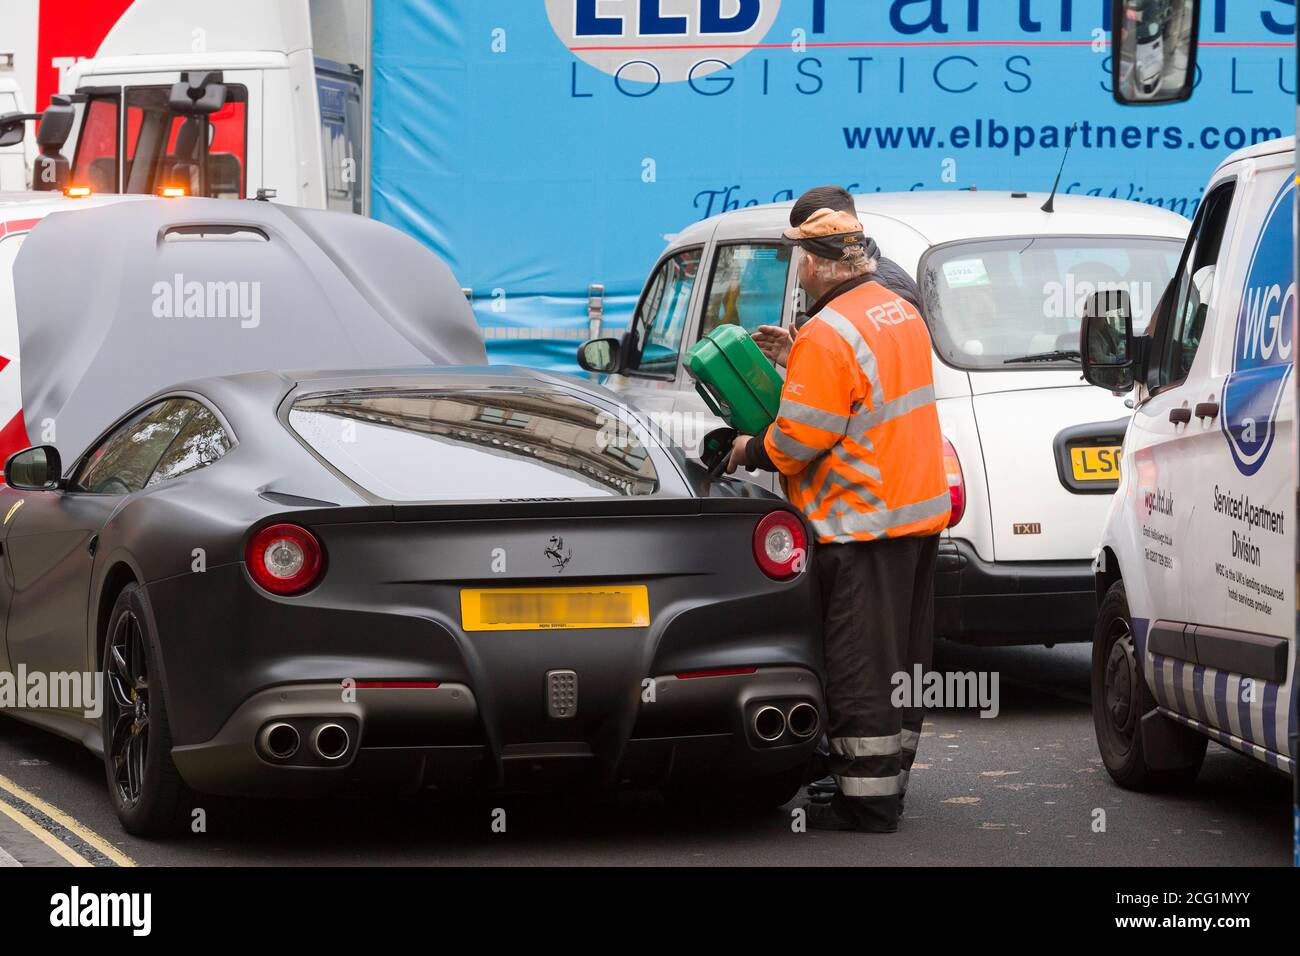 https://c8.alamy.com/comp/2CG1MYY/ferrari-f12-causing-a-traffic-jam-outside-the-national-portrait-gallery-charing-cross-road-london-after-running-out-of-fuel-charing-cross-road-london-uk-15-nov-2017-2CG1MYY.jpg